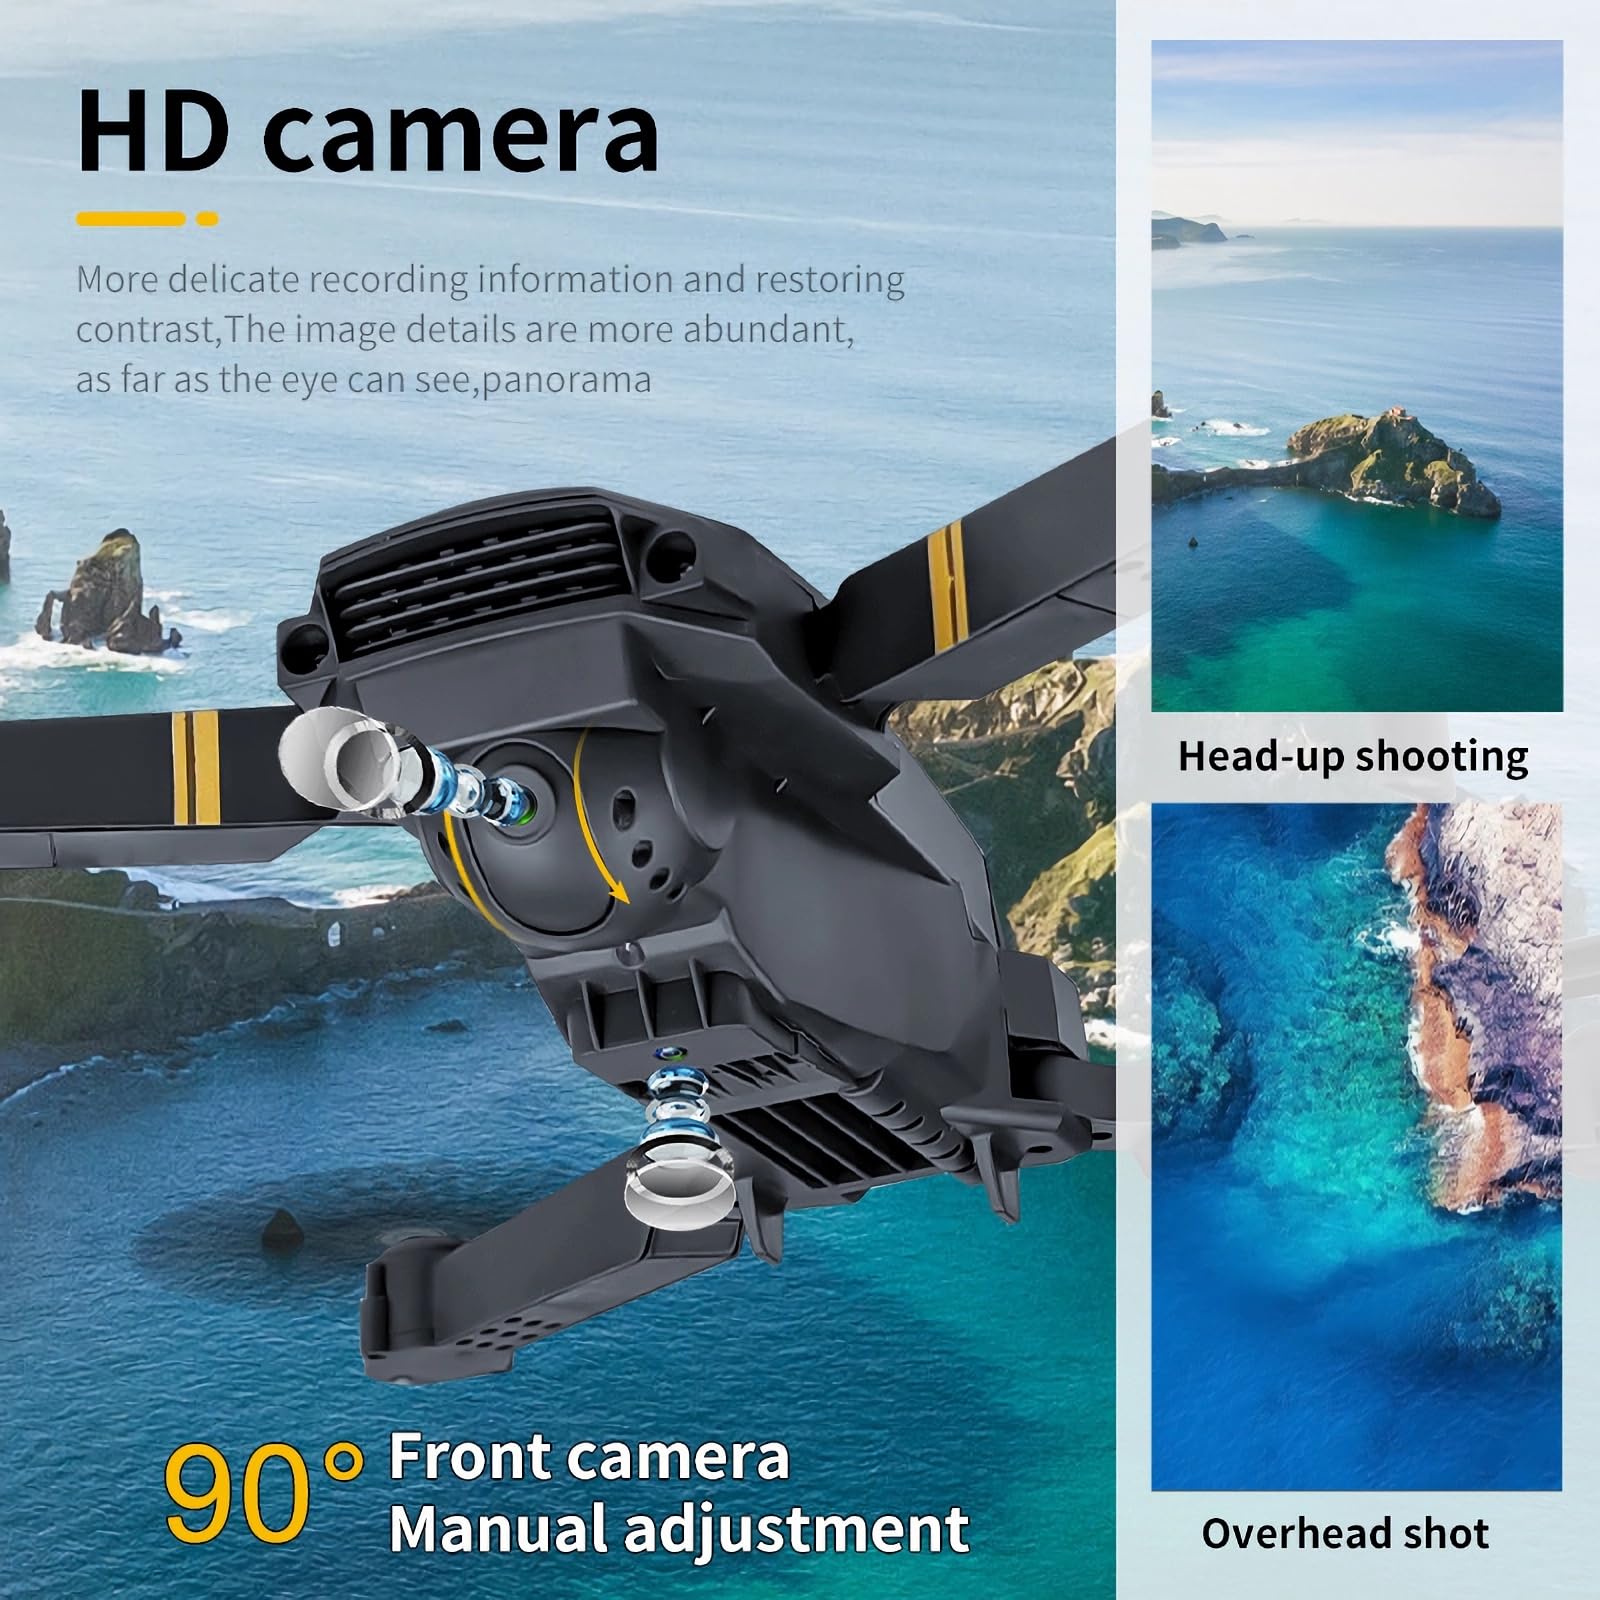 Amazon.com: Brushless Motor Drone, 1080P HD Dual Camera FPV Drone Foldable  WiFi Quadcopters with 𝐎𝐩𝐭𝐢𝐜𝐚𝐥-𝐅𝐥𝐨𝐰 Positioning, Christmas  Holiday Toys Gift for for Adults Kids Beginner : Toys & Games